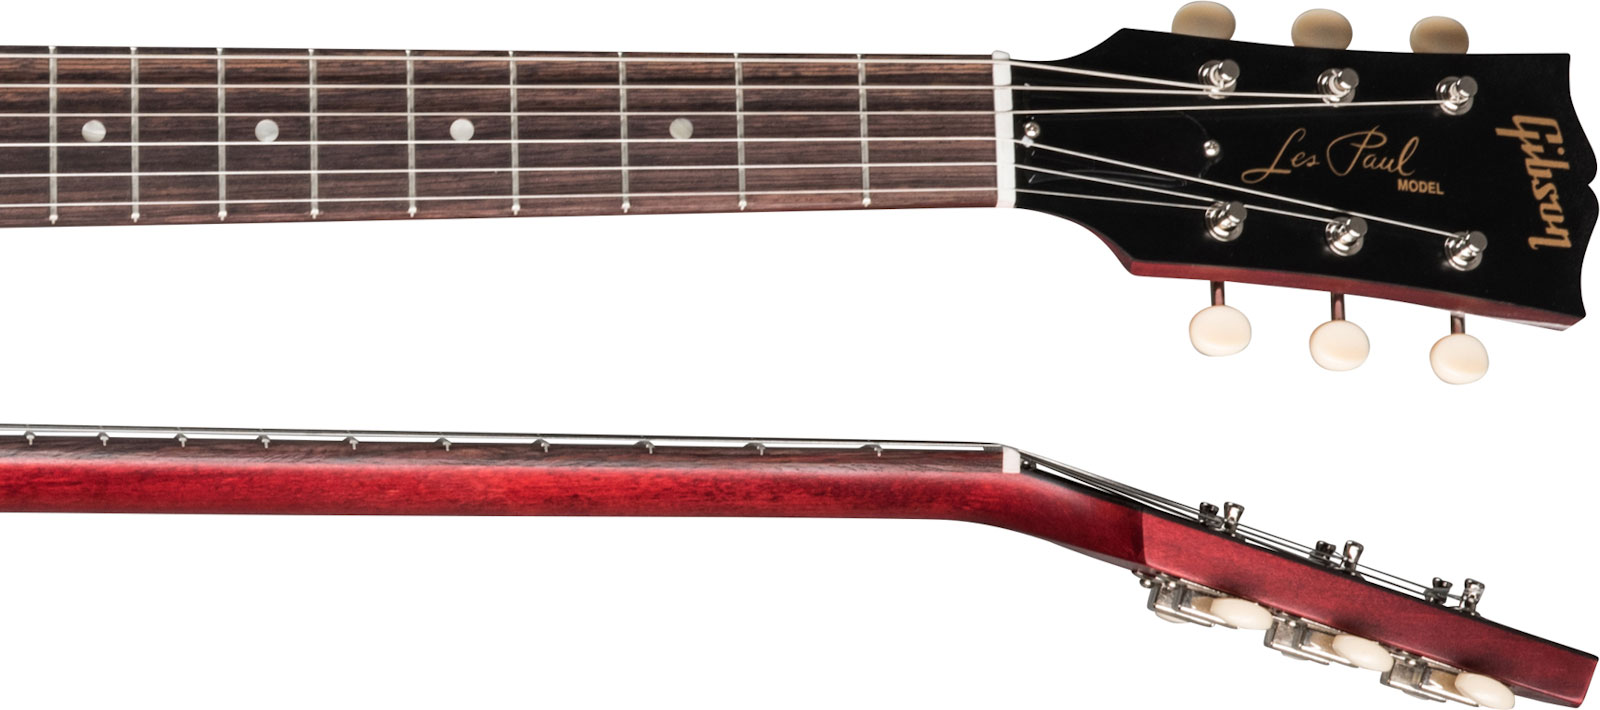 Gibson Les Paul Special Tribute Dc Modern 2p90 Ht Rw - Worn Cherry - Double cut electric guitar - Variation 3